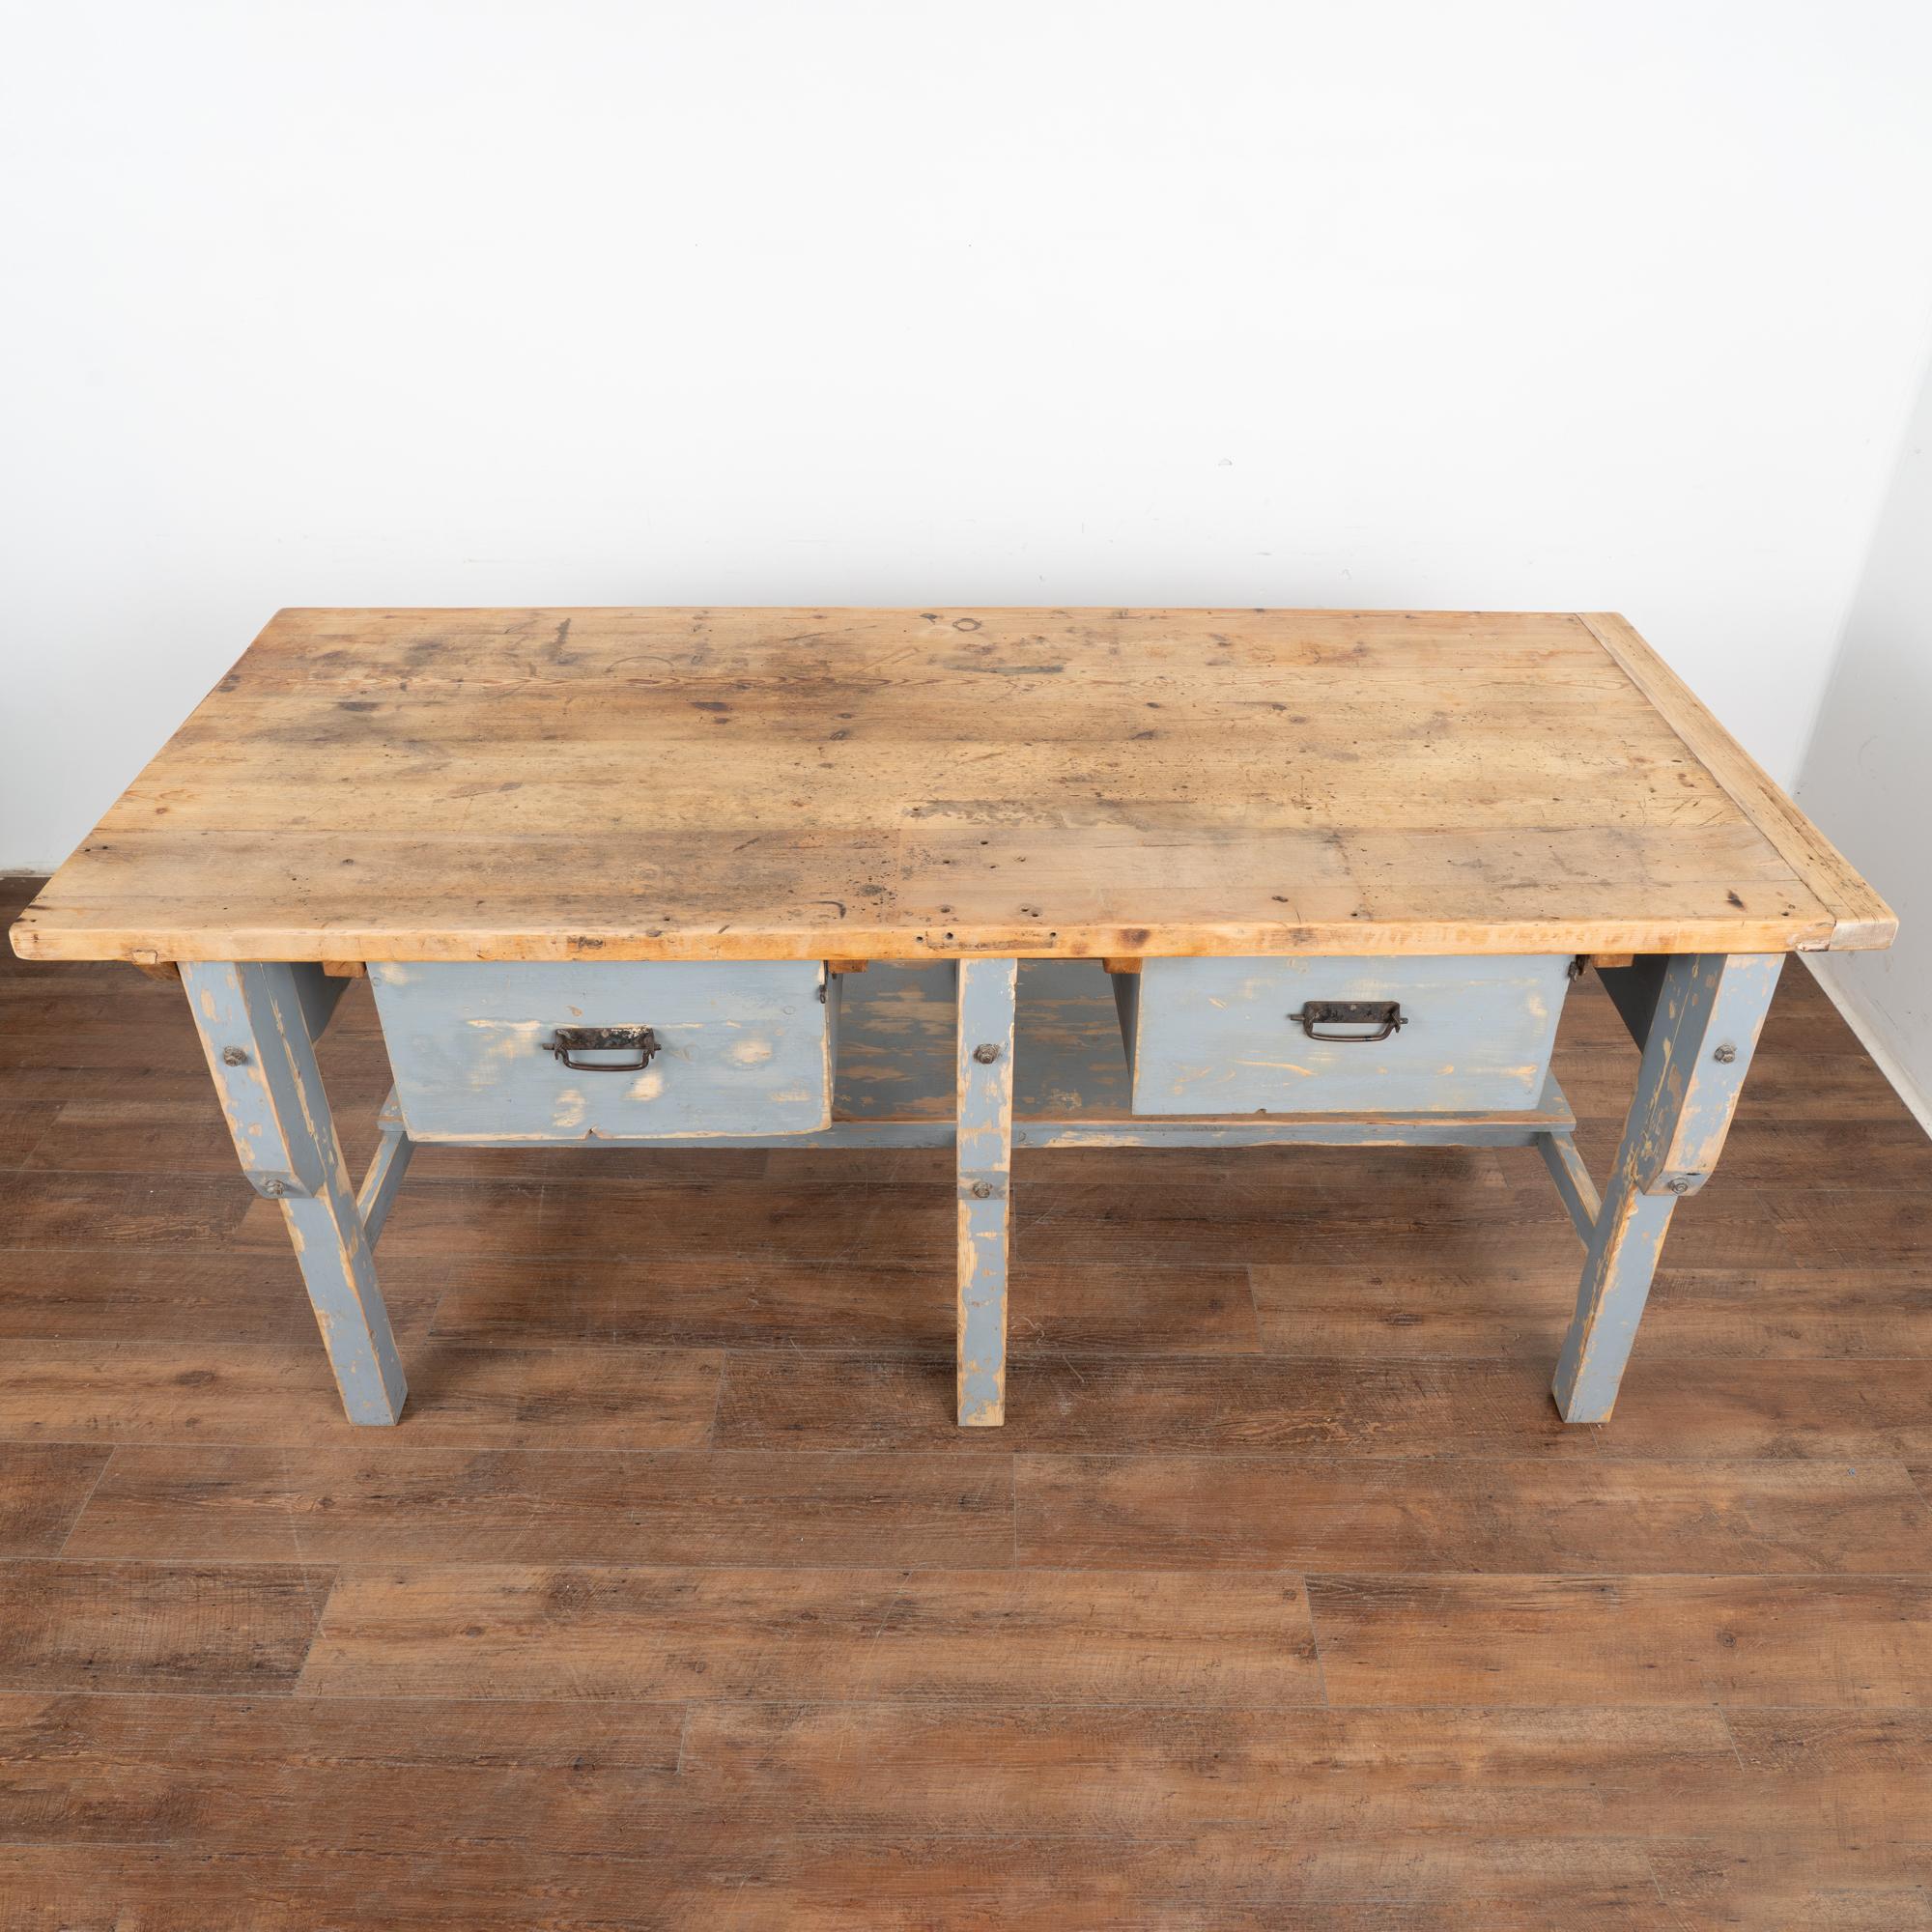 19th Century Large Blue Rustic Work Table Kitchen Island With 2 Drawers and Shelf, Circa 1890 For Sale